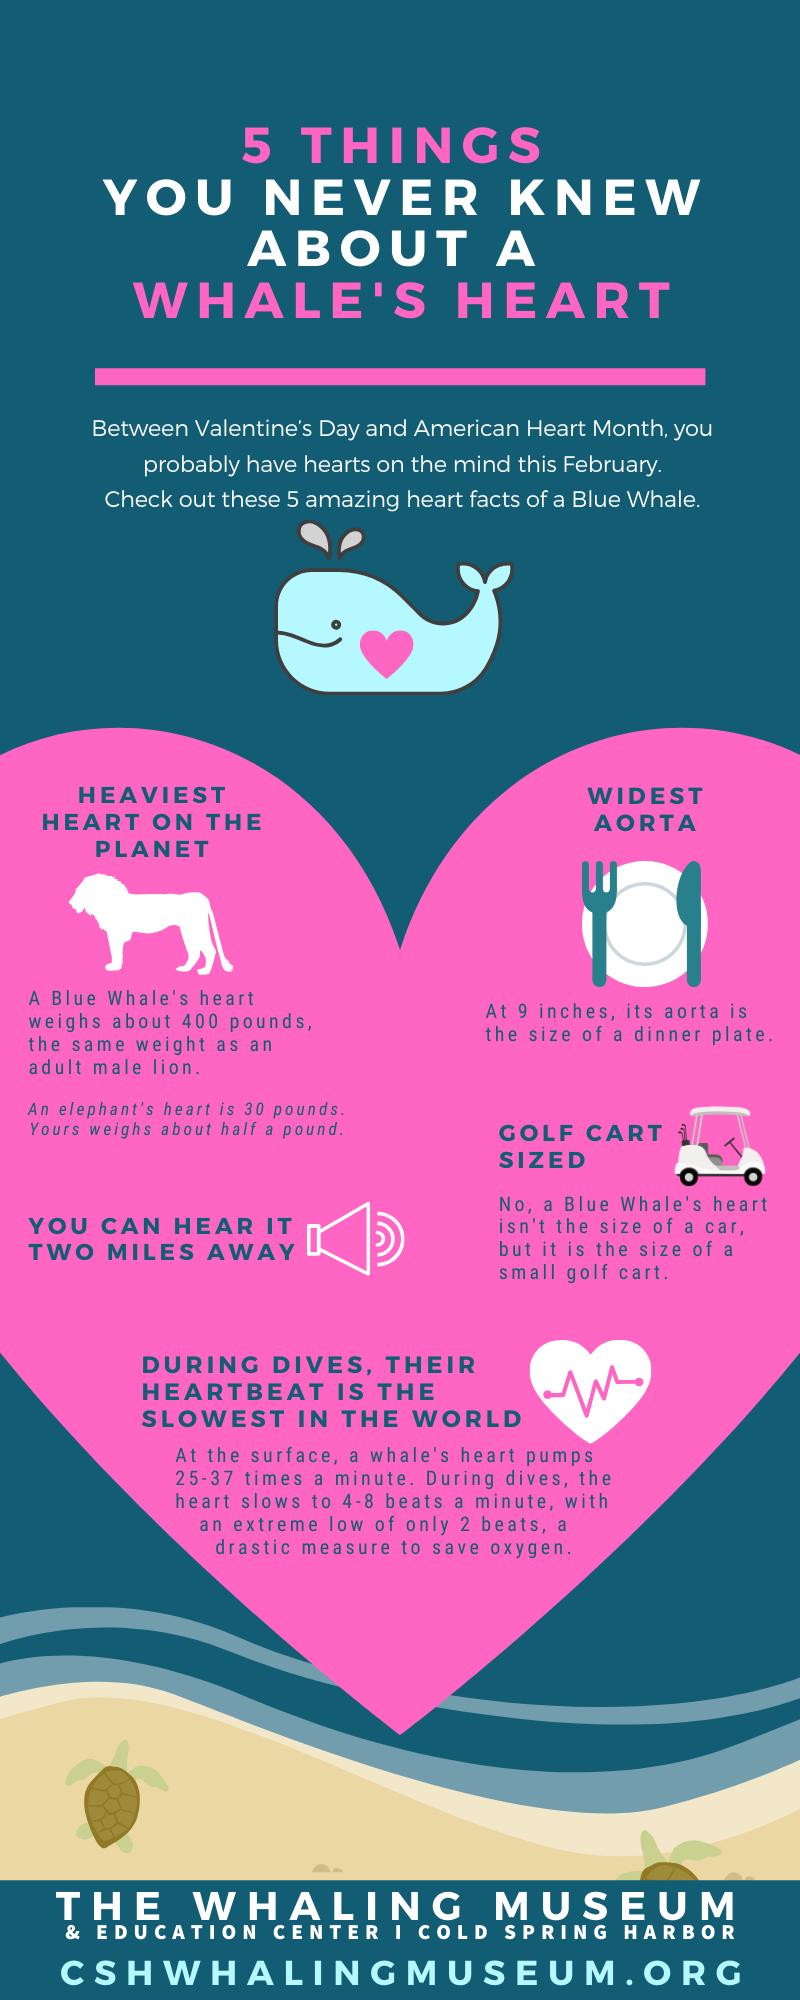 Between Valentine’s Day and American Heart Month, you probably have hearts on the mind this February.   Did you know the world’s largest animal can slow its heart rate to just two beats a minute? I’m also pretty sure you know that the Blue Whale is the largest whale on earth. Facts about a Blue Whale’s Heart: -	A blue whale’s heart is the biggest on the planet, weighing 400 pounds. That’s the weight of about 35 gallon paint cans. By comparison, the heart of an African elephant, the largest land creature, weighs about 30 pounds. Interestingly, an elephant’s heart is 5% of an elephant’s weight, but a blue whale’s heart is only 1% - however the whale’s immense weight is supported by water. At 16 ounces, your heart is half a percent of your body weight.  -	Is a blue whale’s heart really the size of a small car? In 2015, a dissection team in Canada extracted and measured a blue whale’s heart from a whale that washed ashore. No, it wasn’t as big as a Volkswagon – more like a small golf cart. (Still big.)  -	A blue whale’s heartbeat slows dramatically during dives to over 1,000 feet. In one study, a diving blue whale’s heart slowed to 4-8 beats a minute, with an extreme low of only two beats, a drastic measure to save oxygen.  Amazingly, between those beats, the aortic artery contracted to keep blood moving. When the whale came to the surface to breathe, its heart raced to 25-37 beats a minute. Scientists think that that a whale’s heart works close to physical limits and cannot beat faster, which is why whales have reached their largest size possible.  -	The aorta measures over 9 inches.  -	And the best fact of all: a blue whale’s heartbeat can be detected from 2 MILES AWAY.